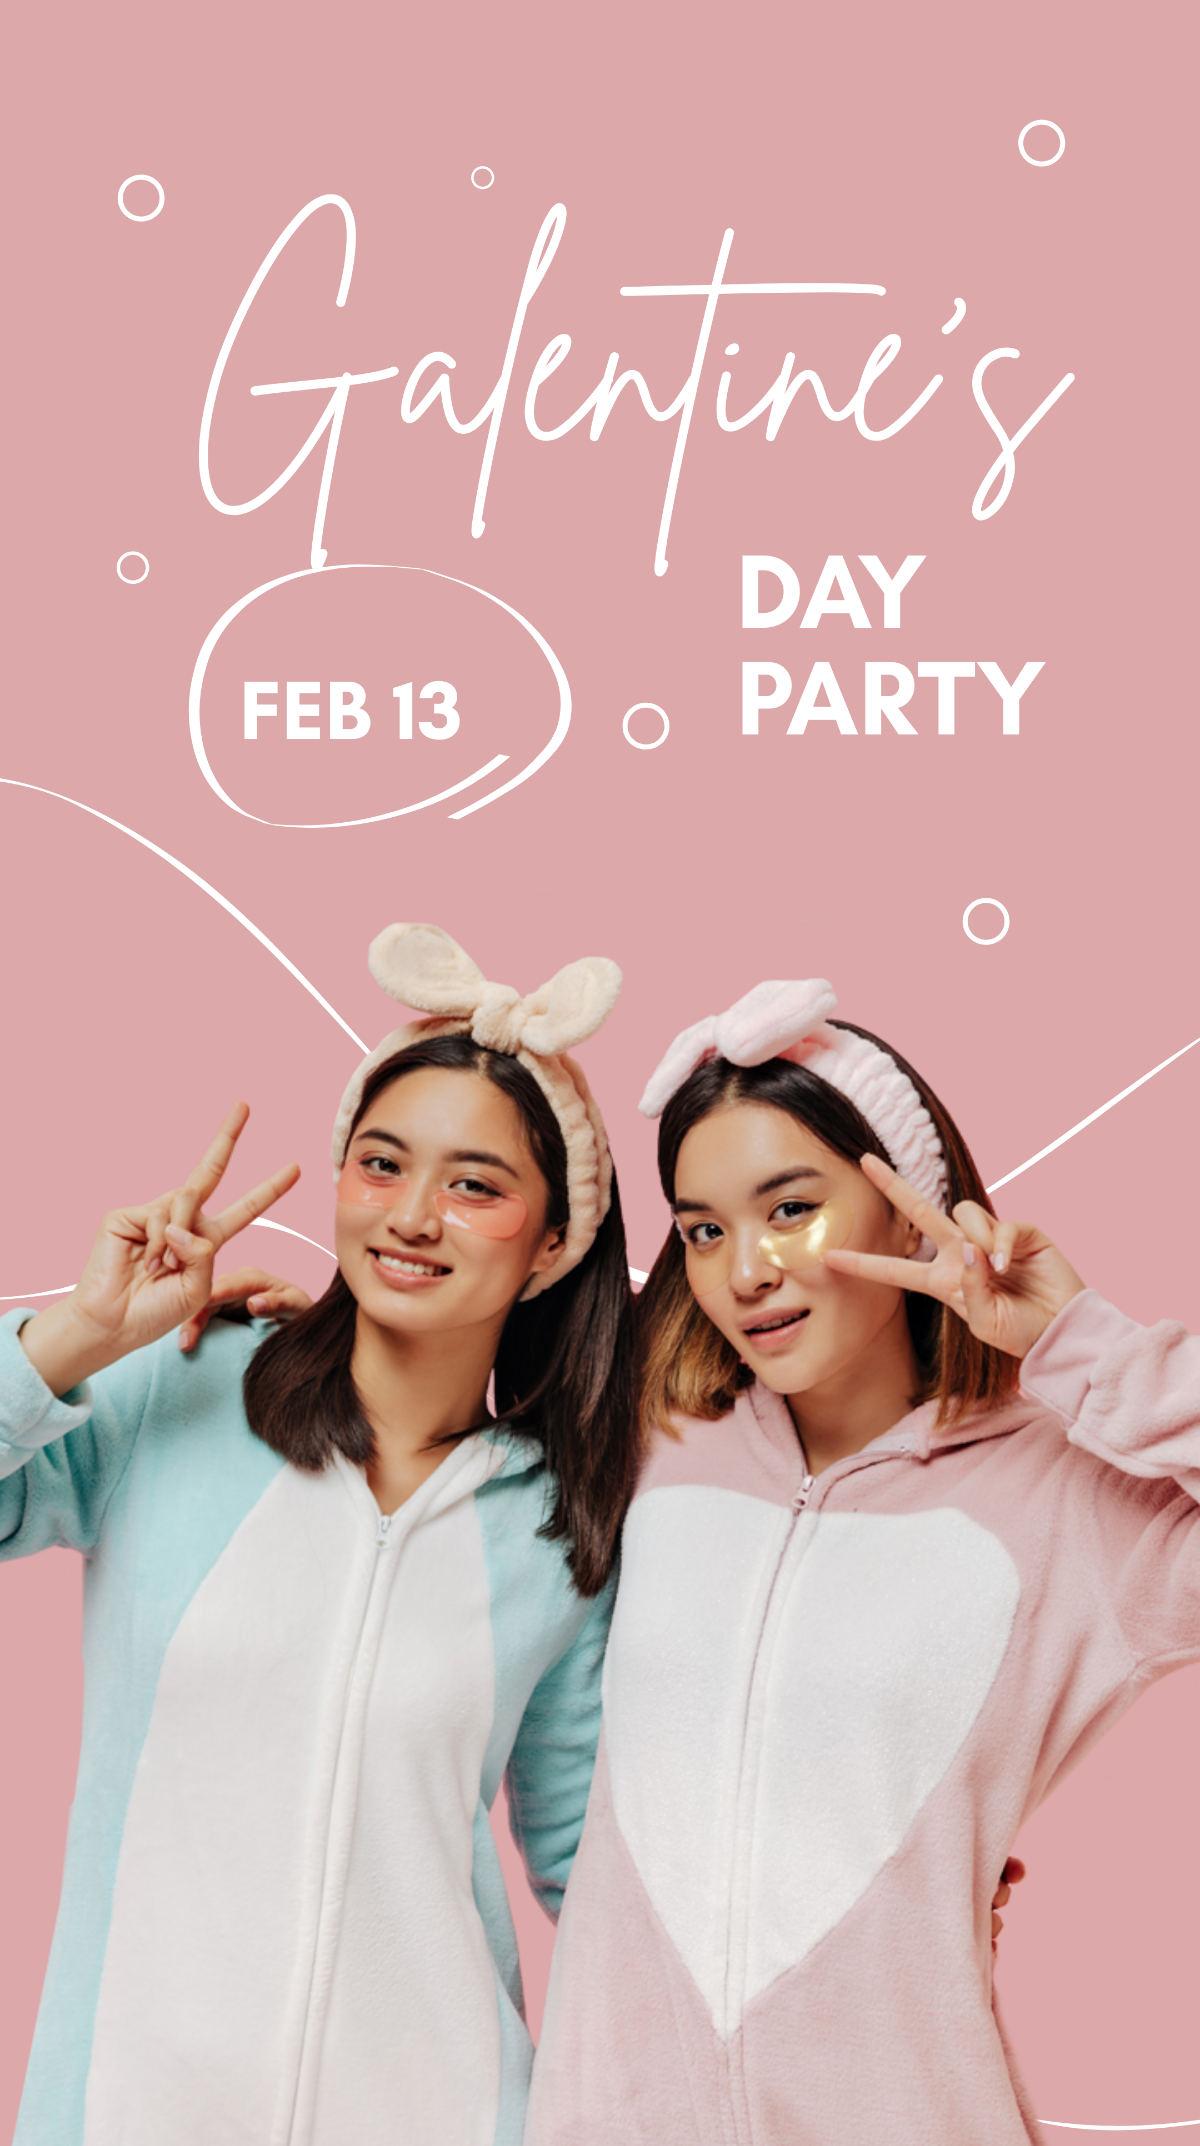 Galentines Day Party Whatsapp Post Template